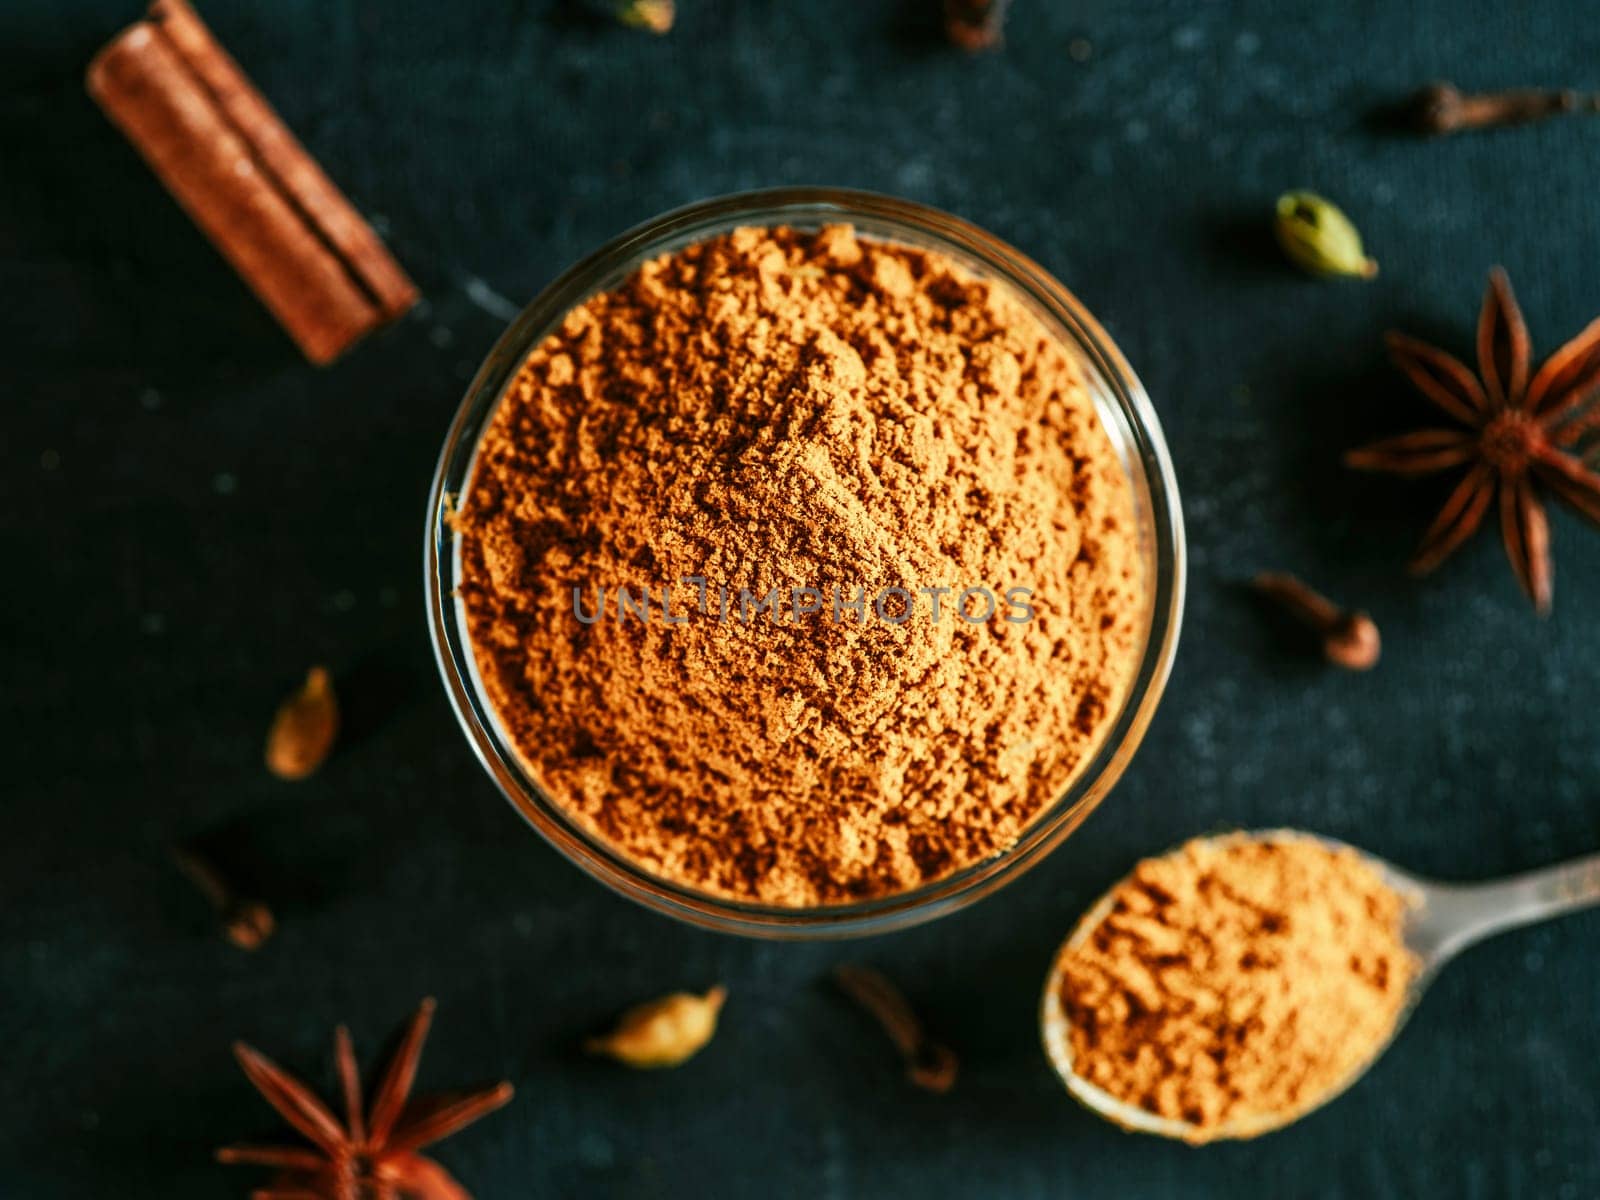 Indian or pakistani masala powder in spoon and small glass bowl. Close up view of homemade dry curry garam masala mix spices blend on dark background.